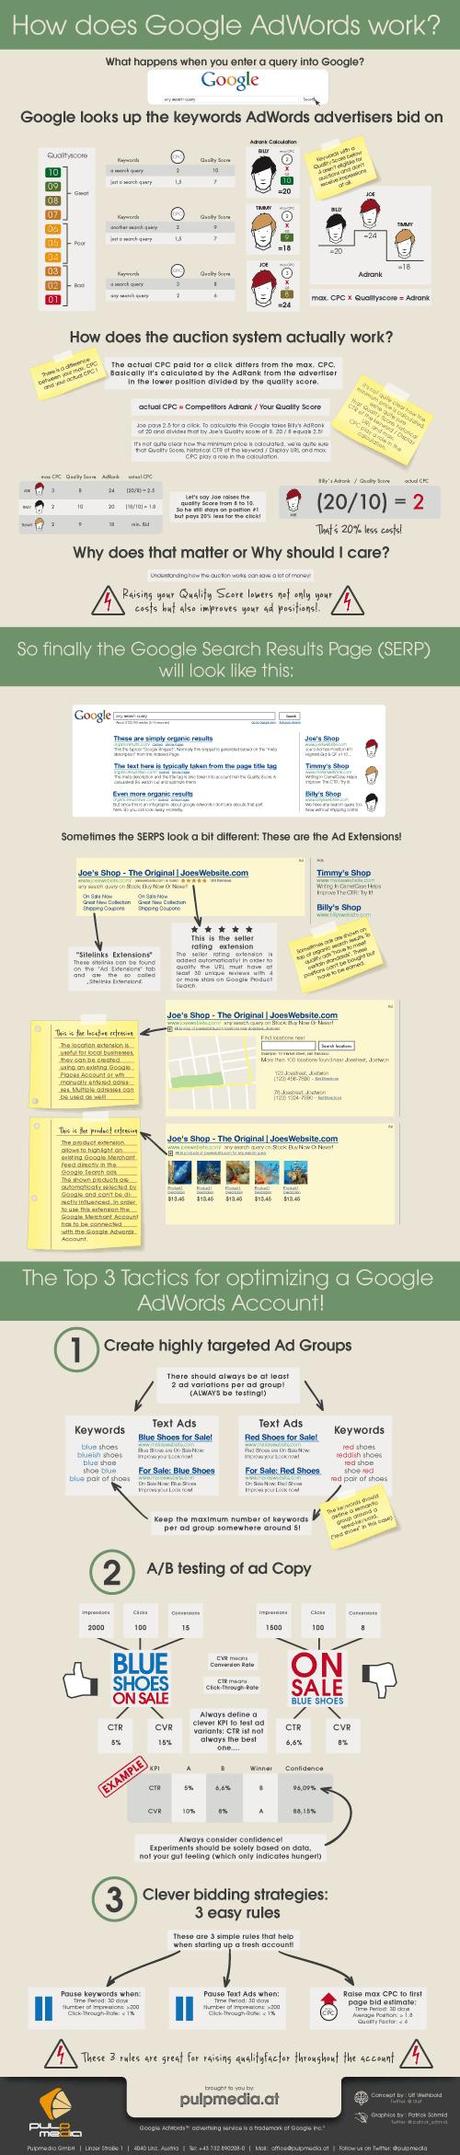 How does Google AdWords work? - infographic